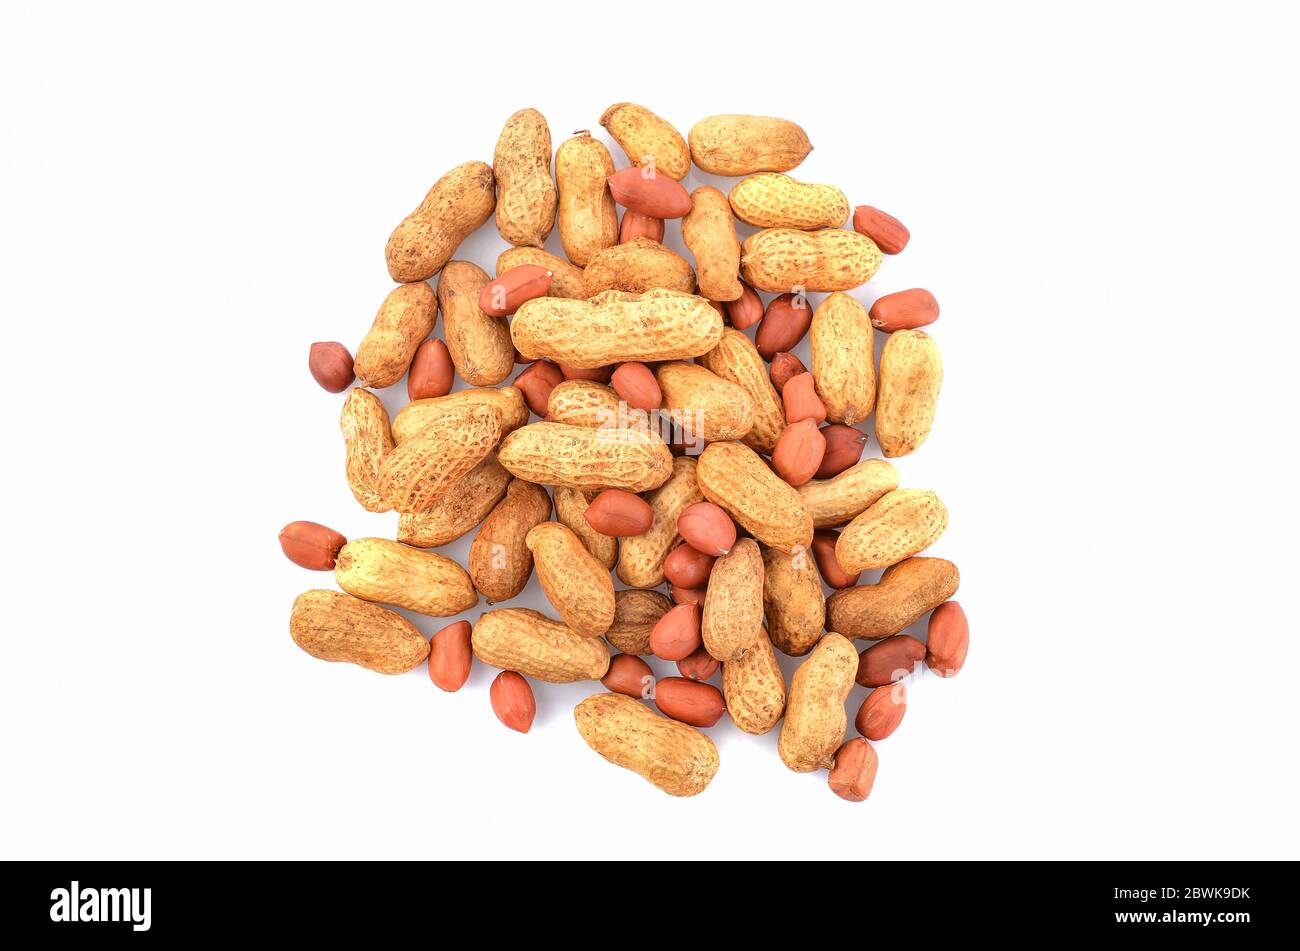 Top view of peanuts isolated on white background Stock Photo